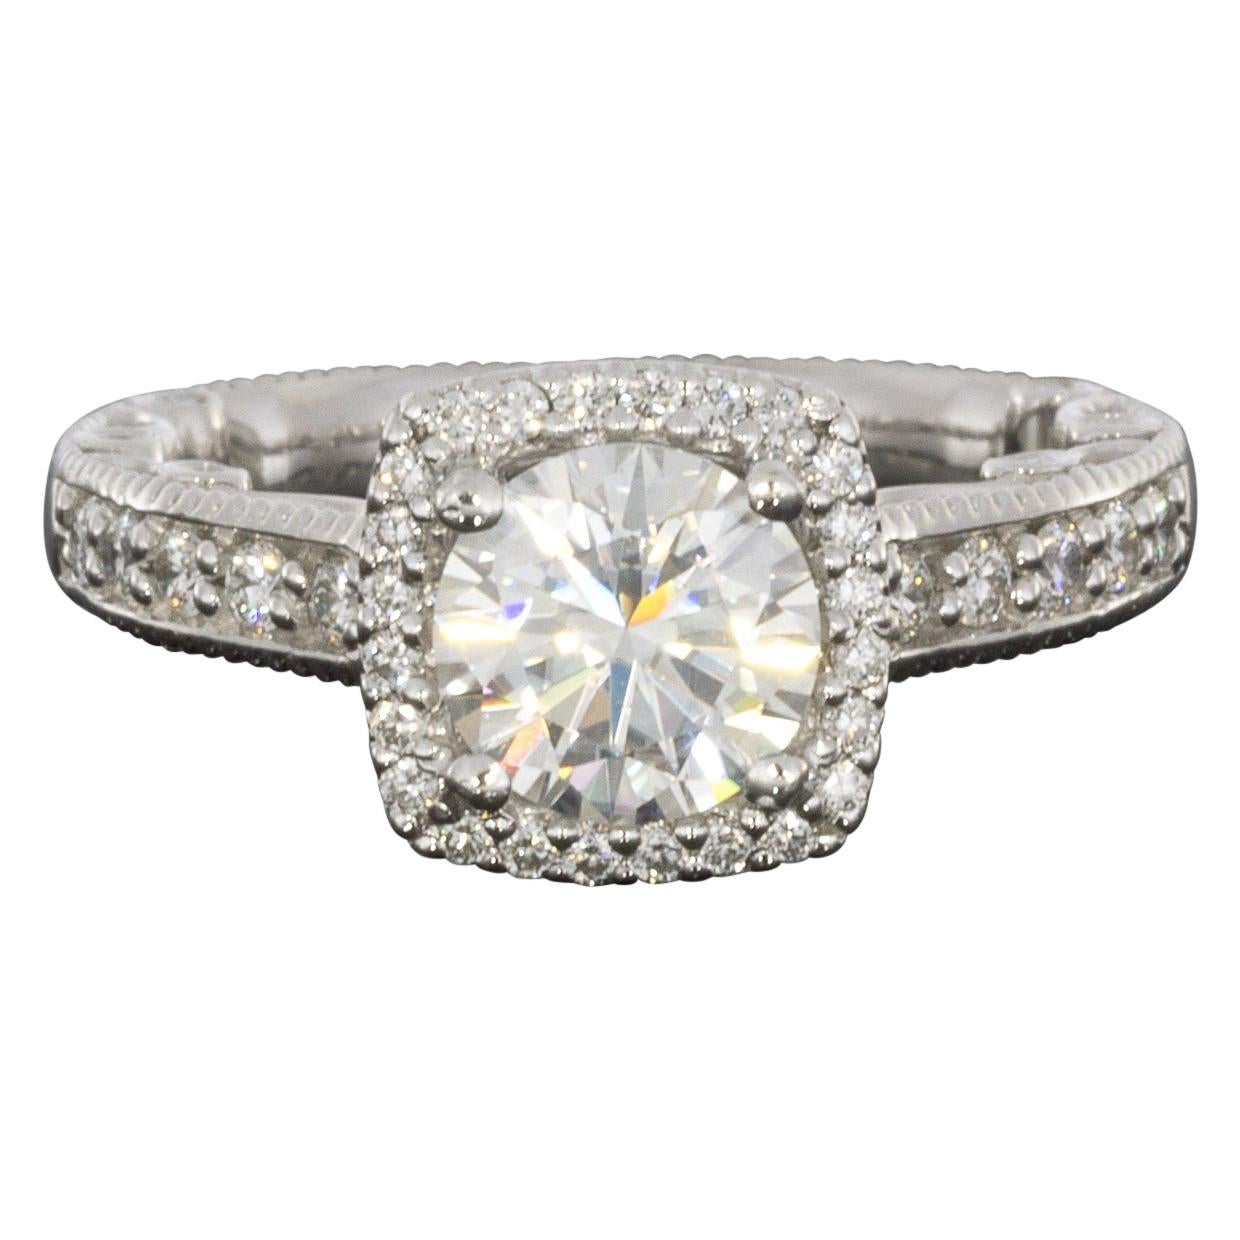 Verragio Paradiso Colorless Moissanite and Diamond Halo Engagement Ring